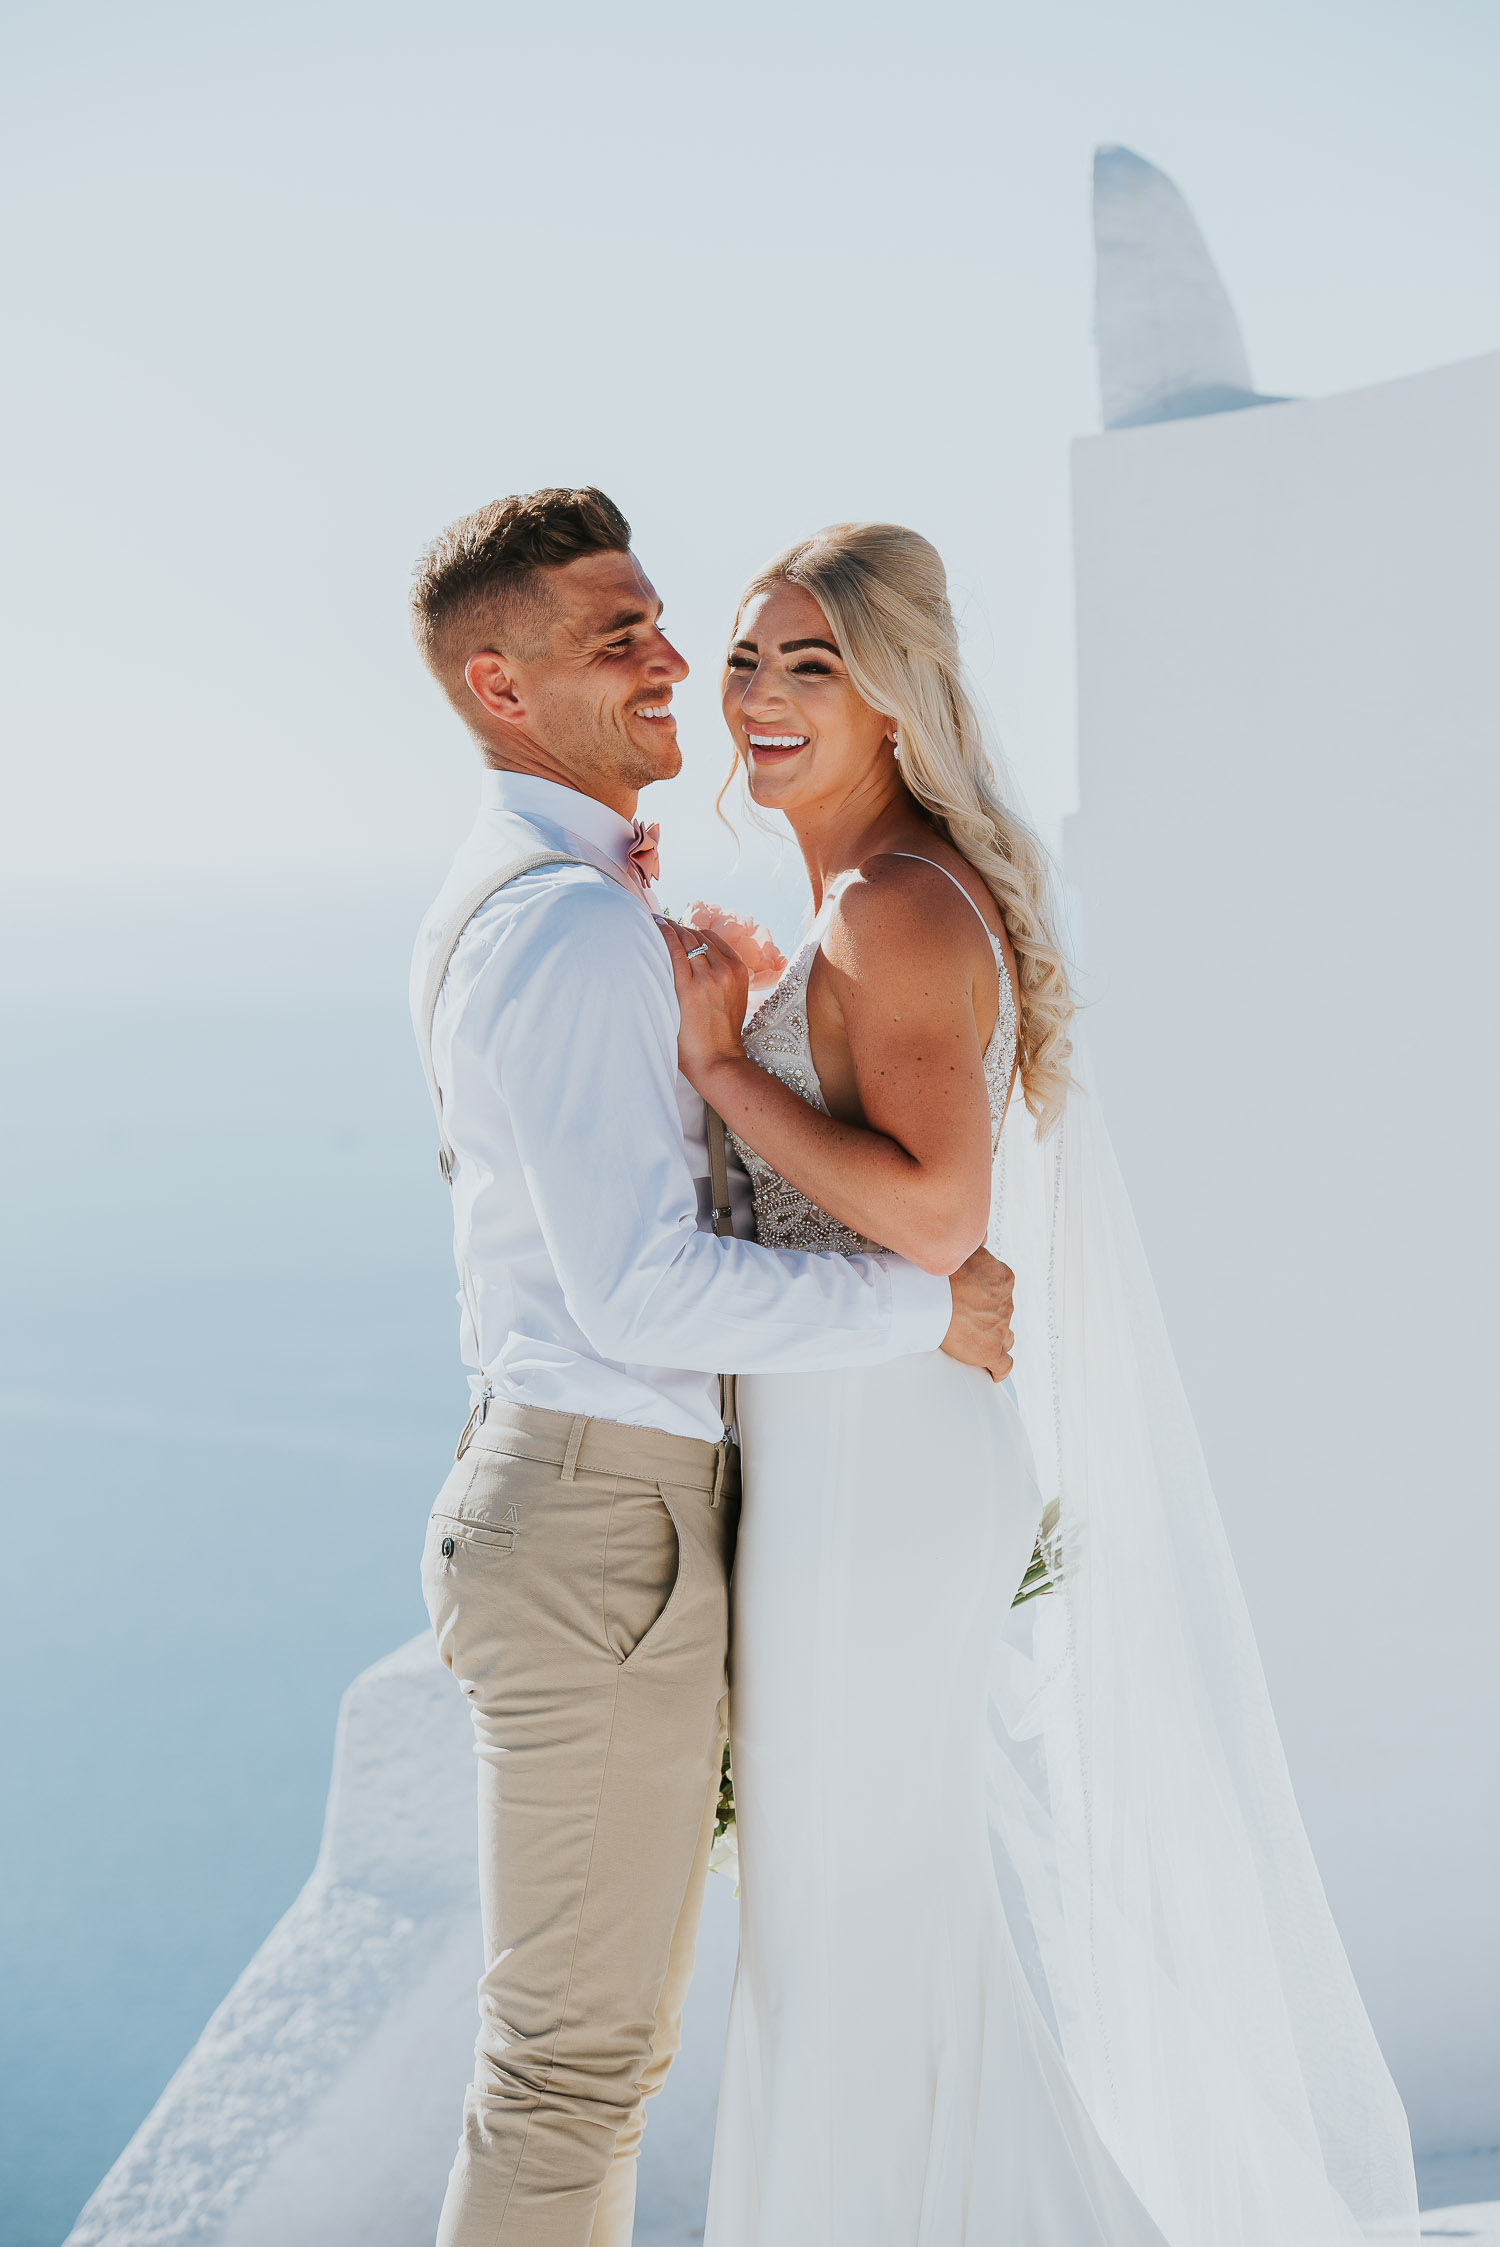 Wedding photographer Santorini: close up of bride and groom laughing in front of the bell tower basked in the afternoon light by Ben and Vesna.